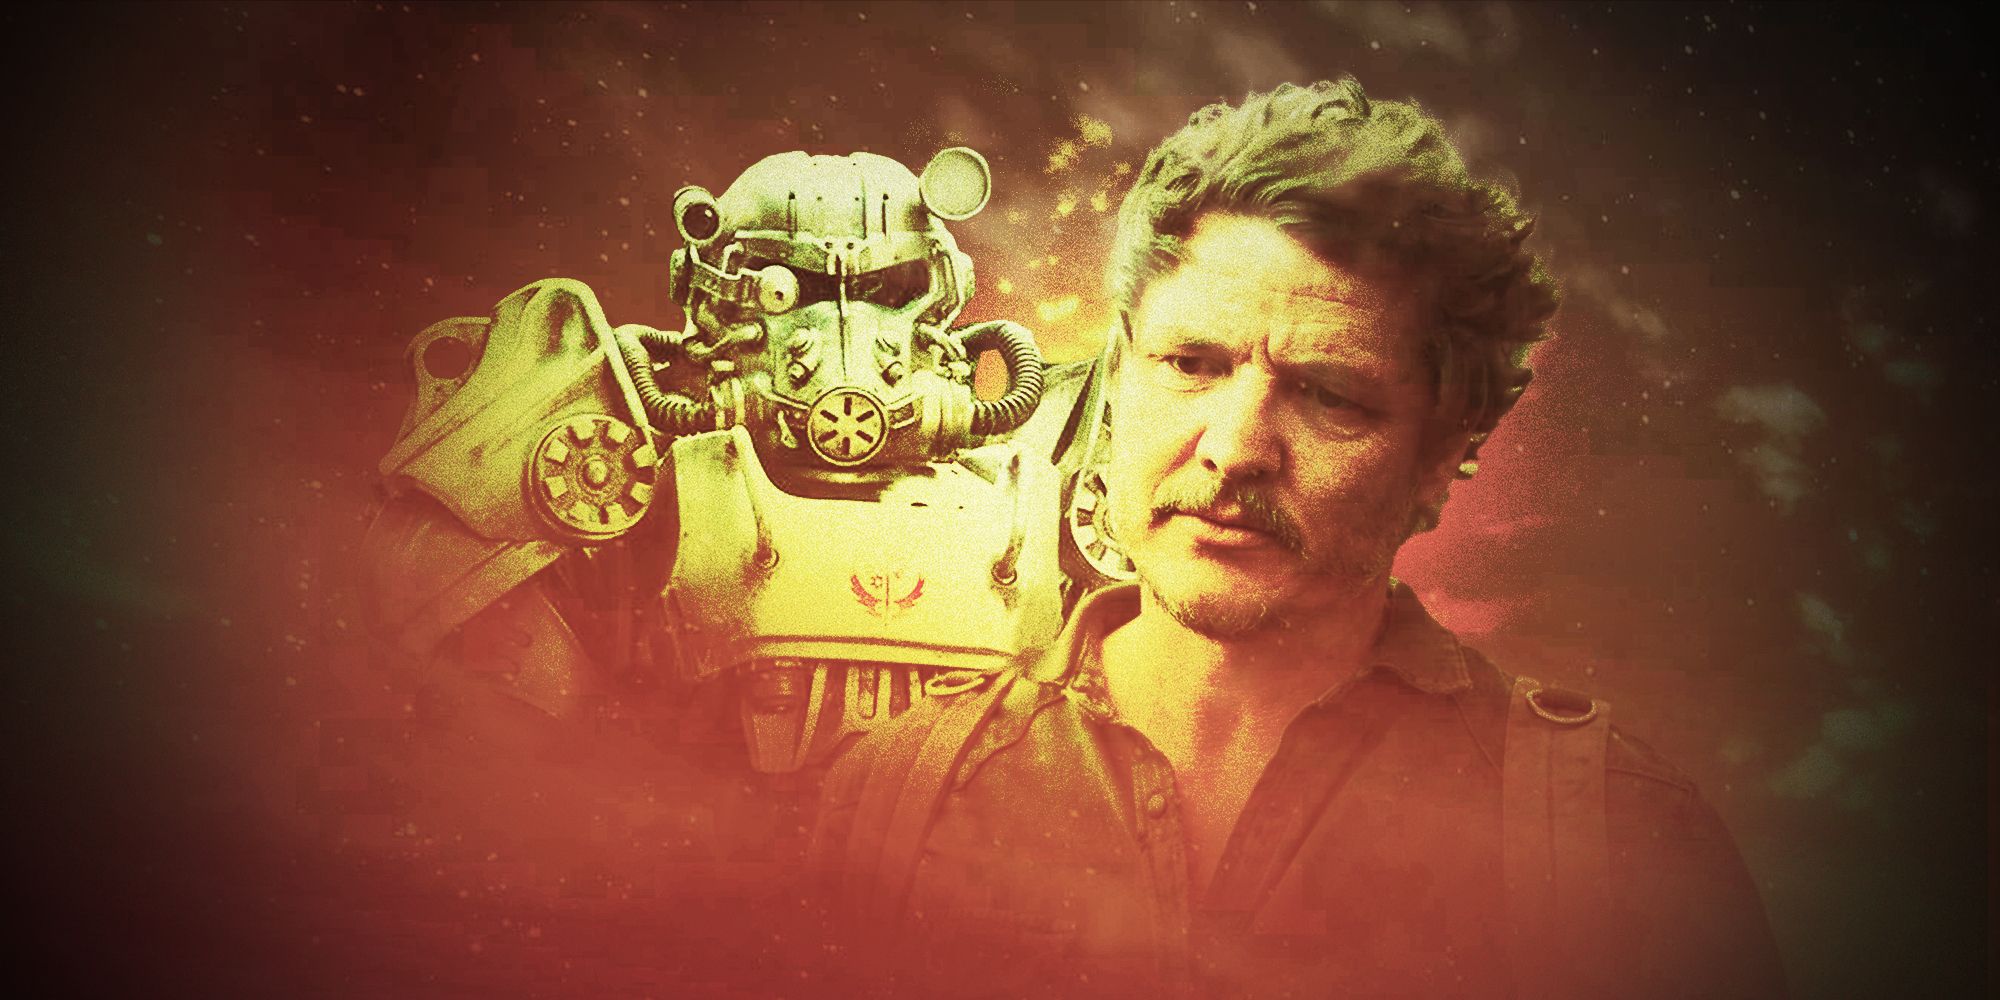 A Fallout Power Suit and Pedro Pascal as Joel in The Last of Us